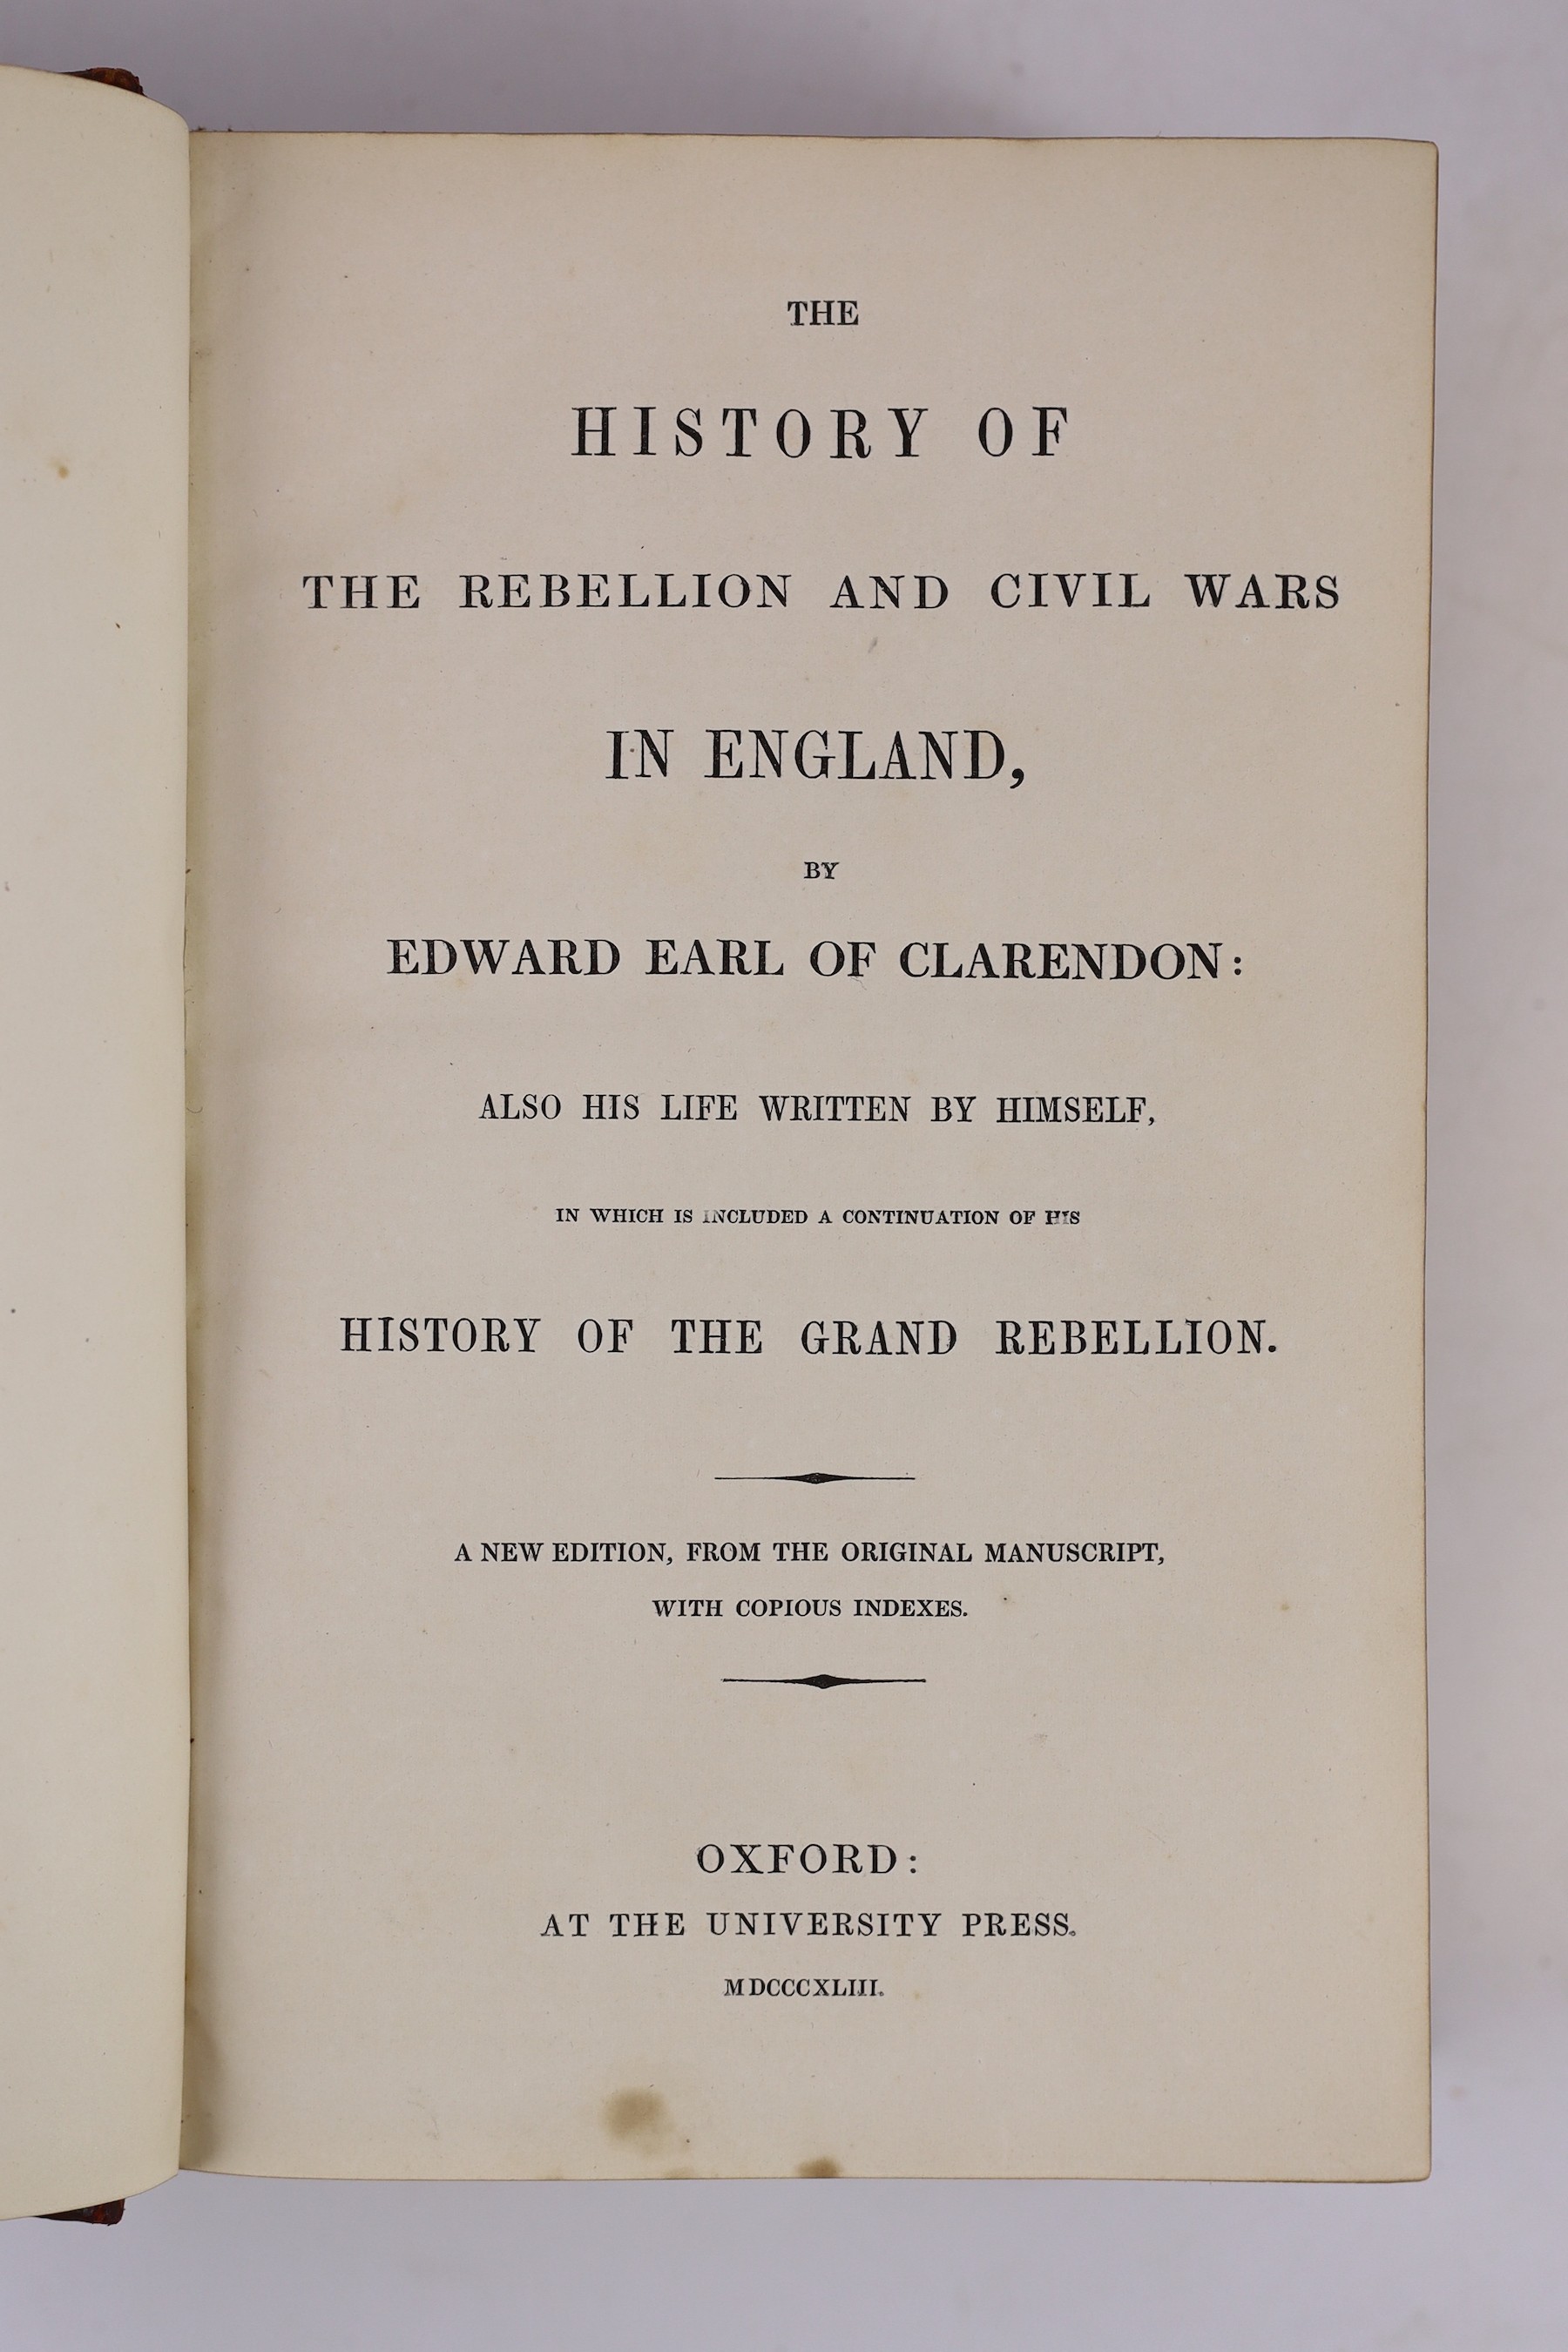 Rawlinson, George - The Five Great Monarchies of the Ancient Eastern World, 2nd edition, 3 vols, 8vo, rebound cloth, Dodd, Mead and Company, New York, 1881 and Clarendon, Edward Hyde, 1st Earl of - The History of the Reb